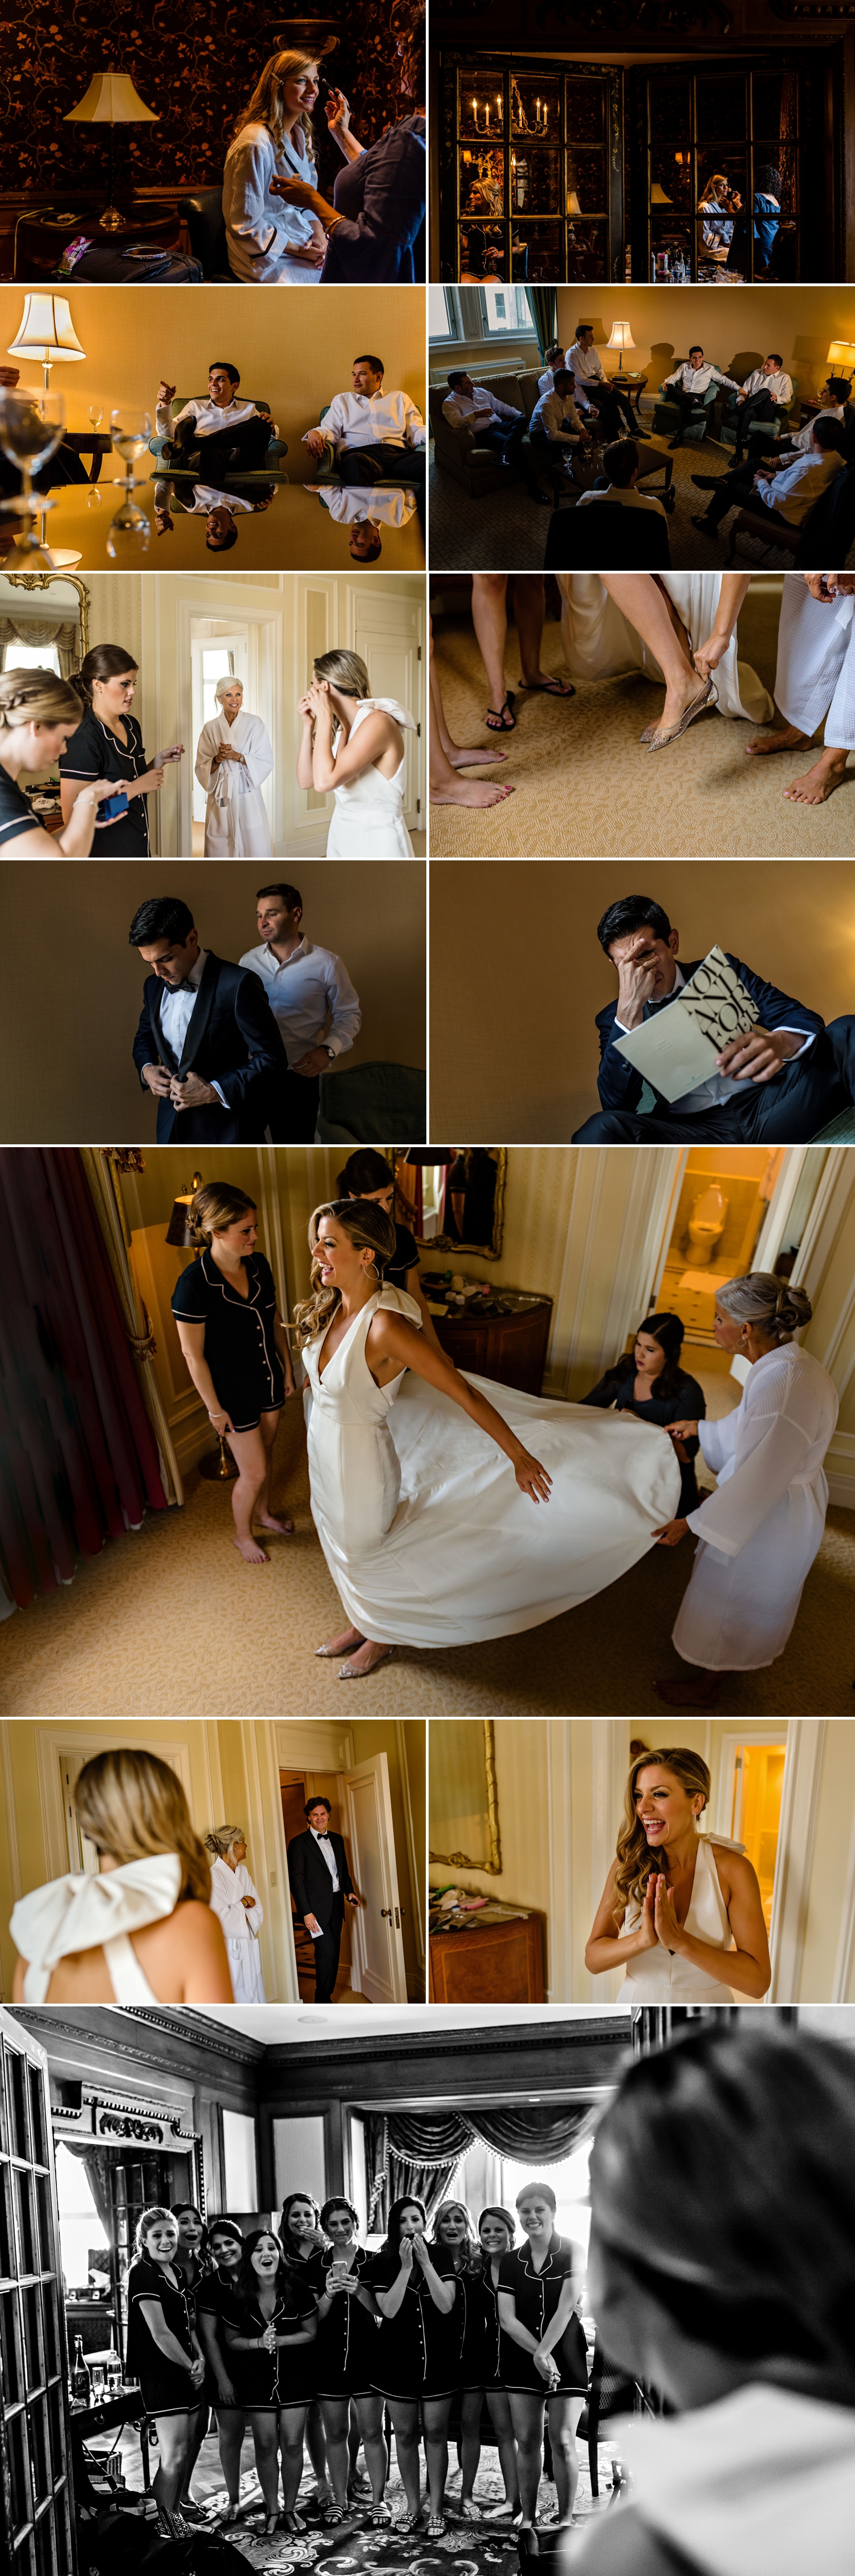 photos of candid  getting ready moments for a jewish wedding at the chateau laurier wedding in ottawa ontario